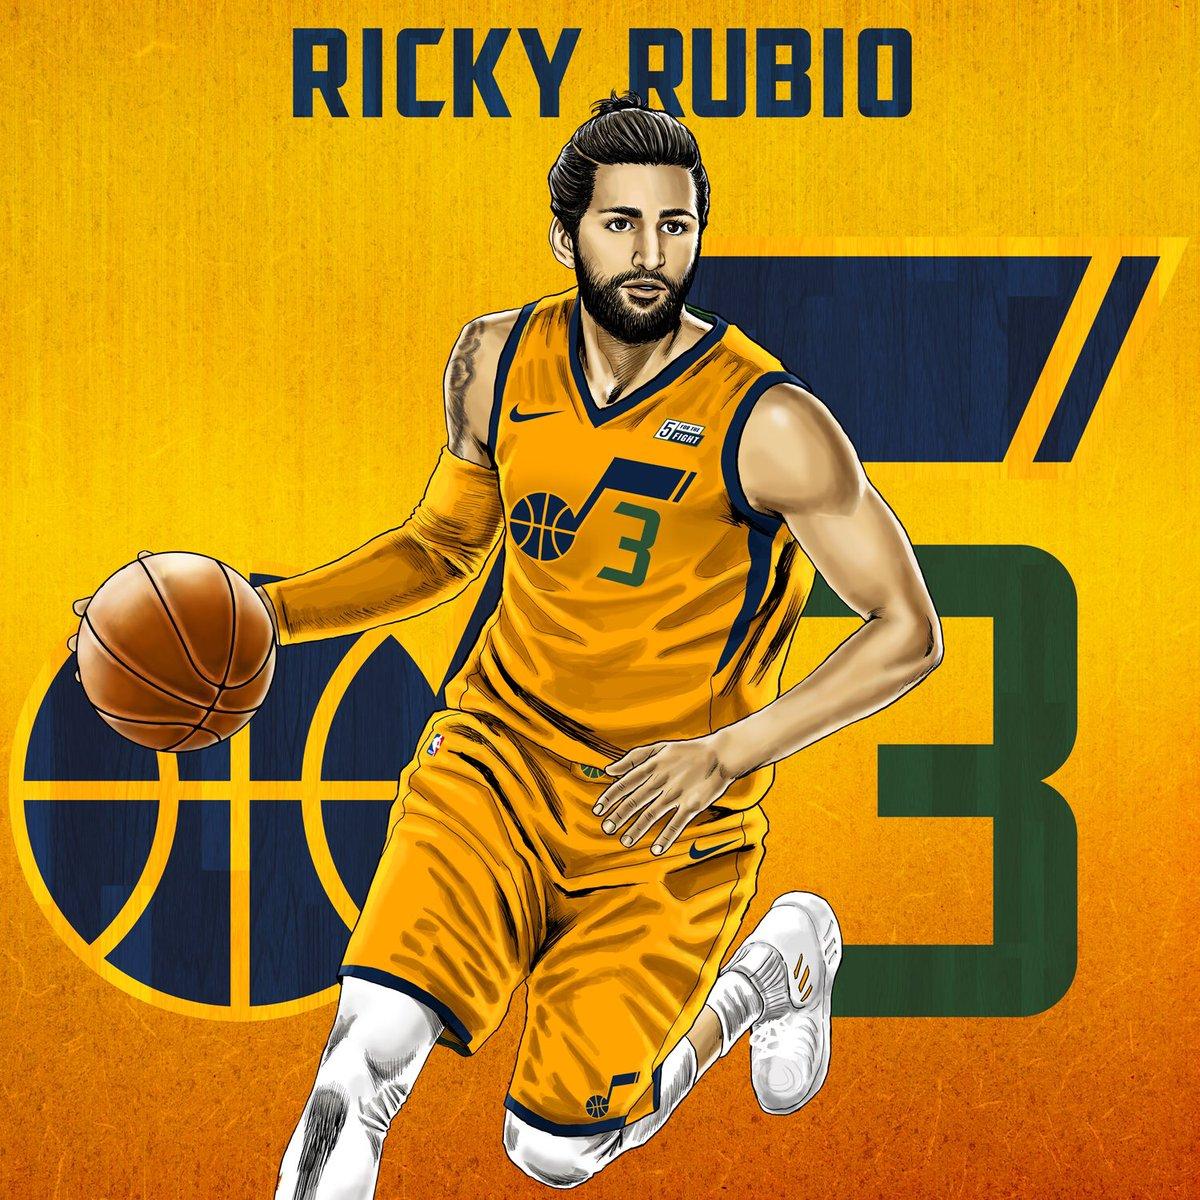 Ricky Rubio's about to start. Ready for a new season